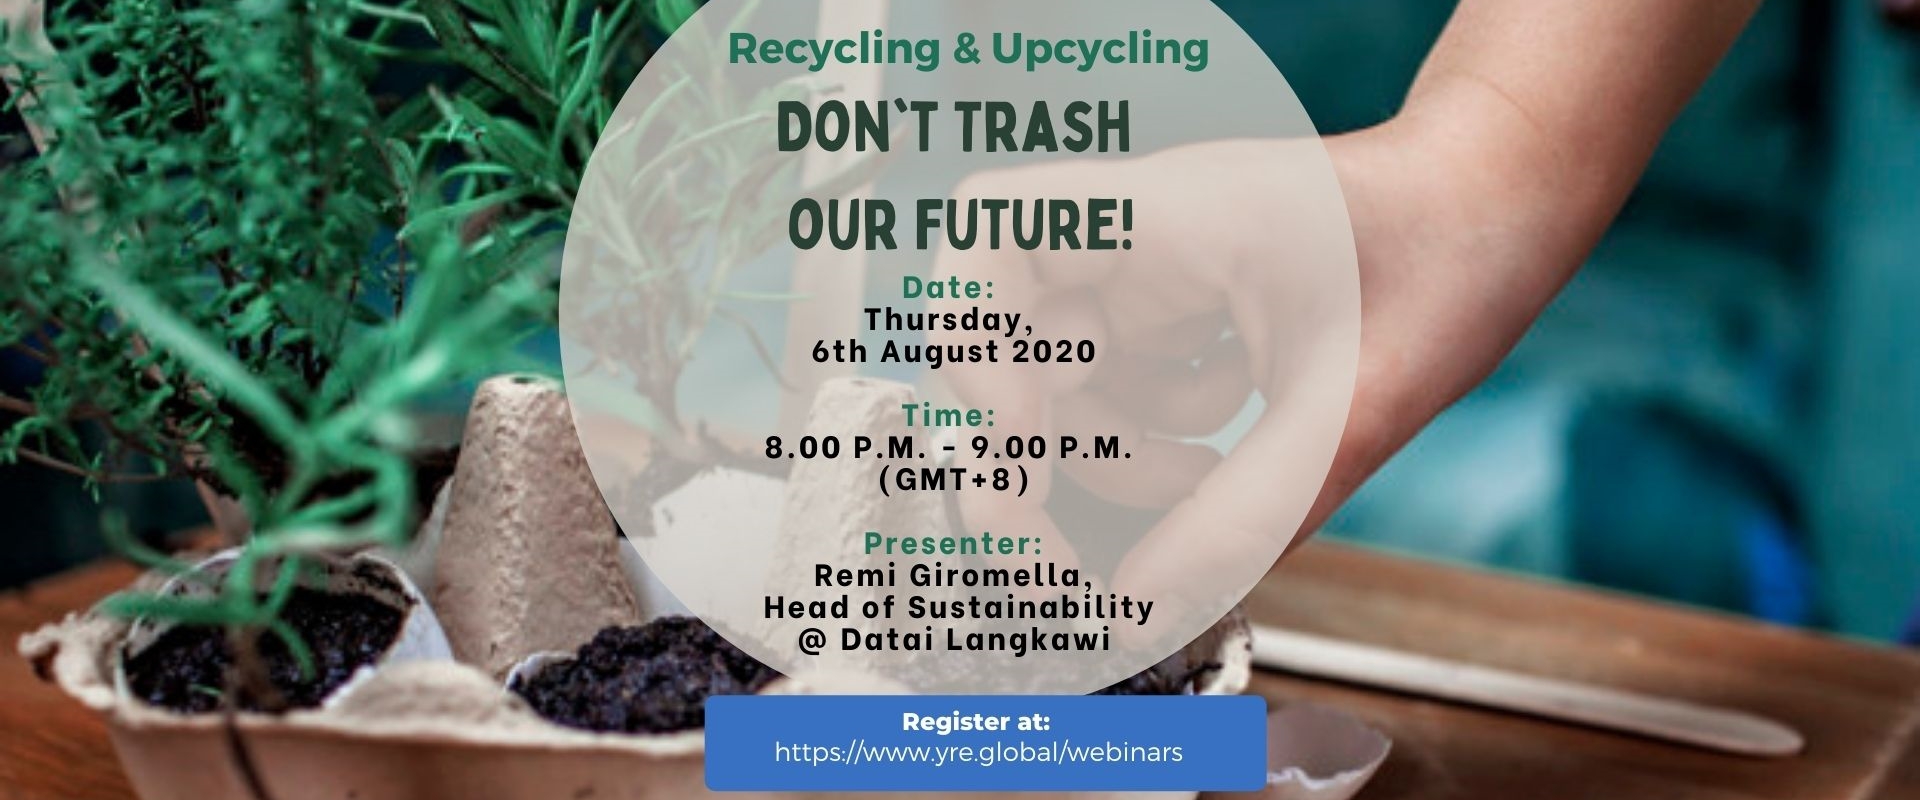 Recycling and Upcycling Don't Trash Our Future